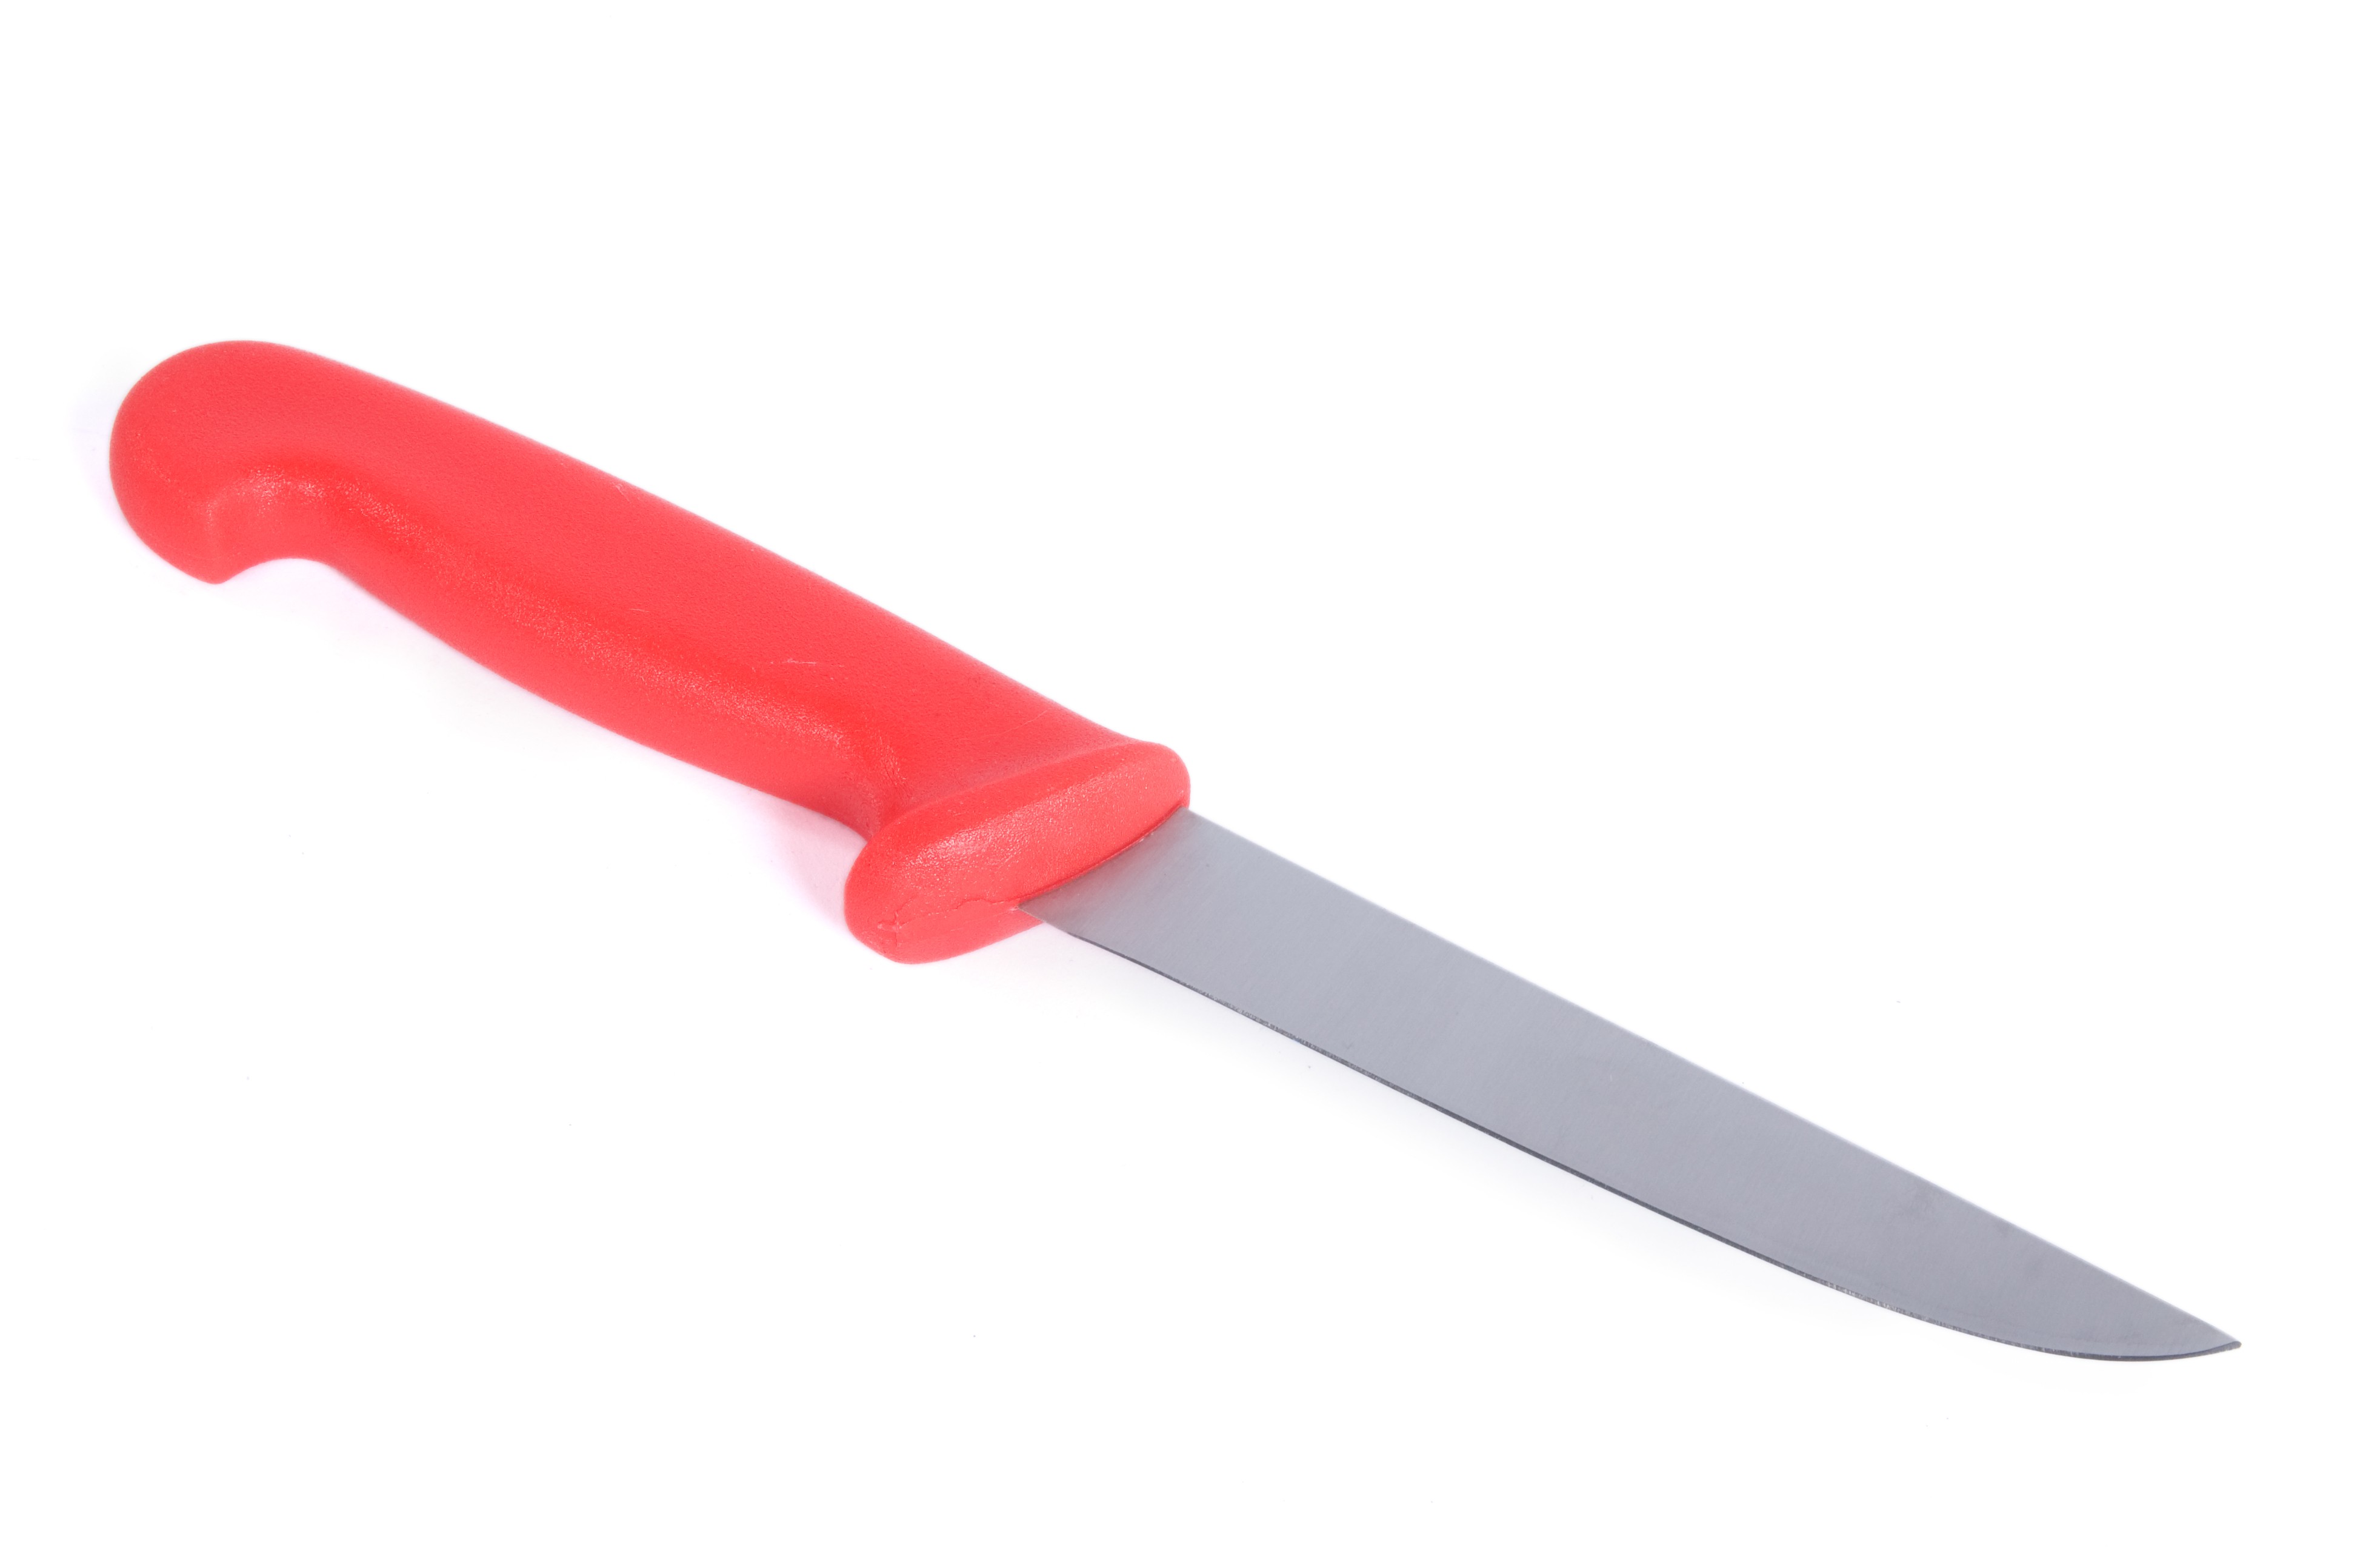 Boning Knife 6 inch - BONK6 | Plastic Containers, Plastic Trays